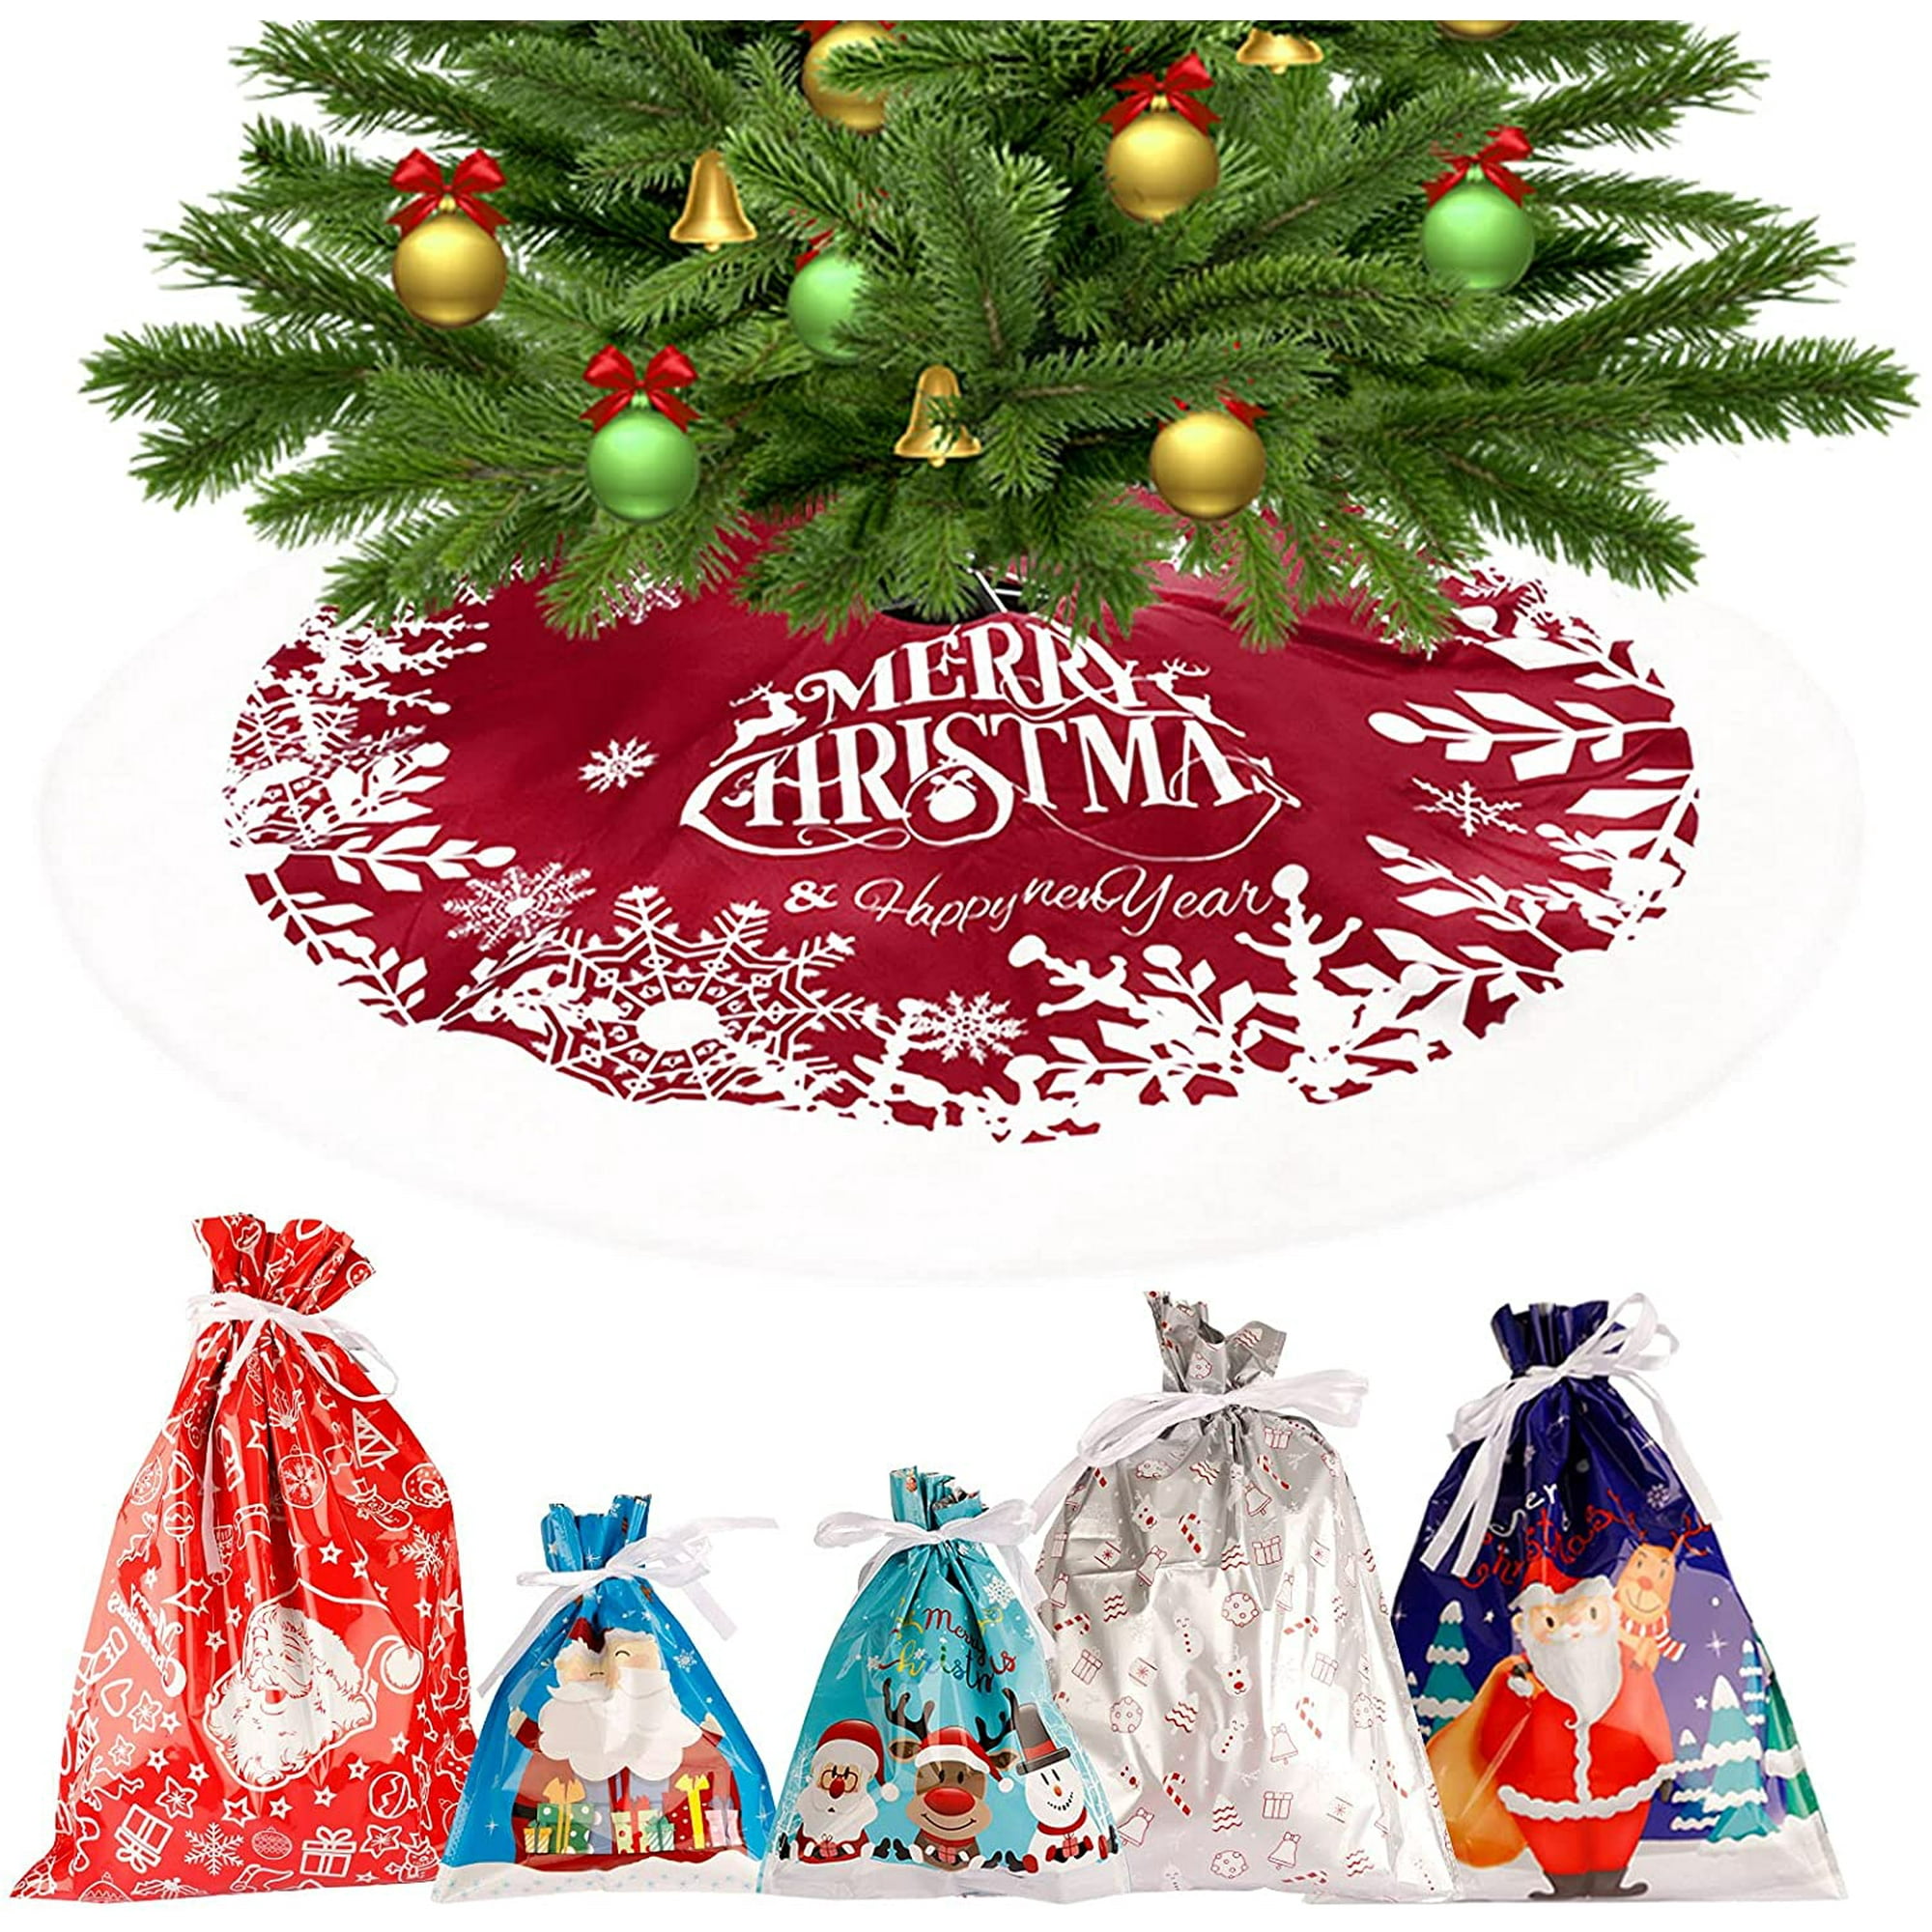 HMGDFUE Christmas Tree Skirts 48 Inch Flannel Tree Skirts for Merry Christmas Party Christmas Tree Skirt Decorations with Five Candy Bags